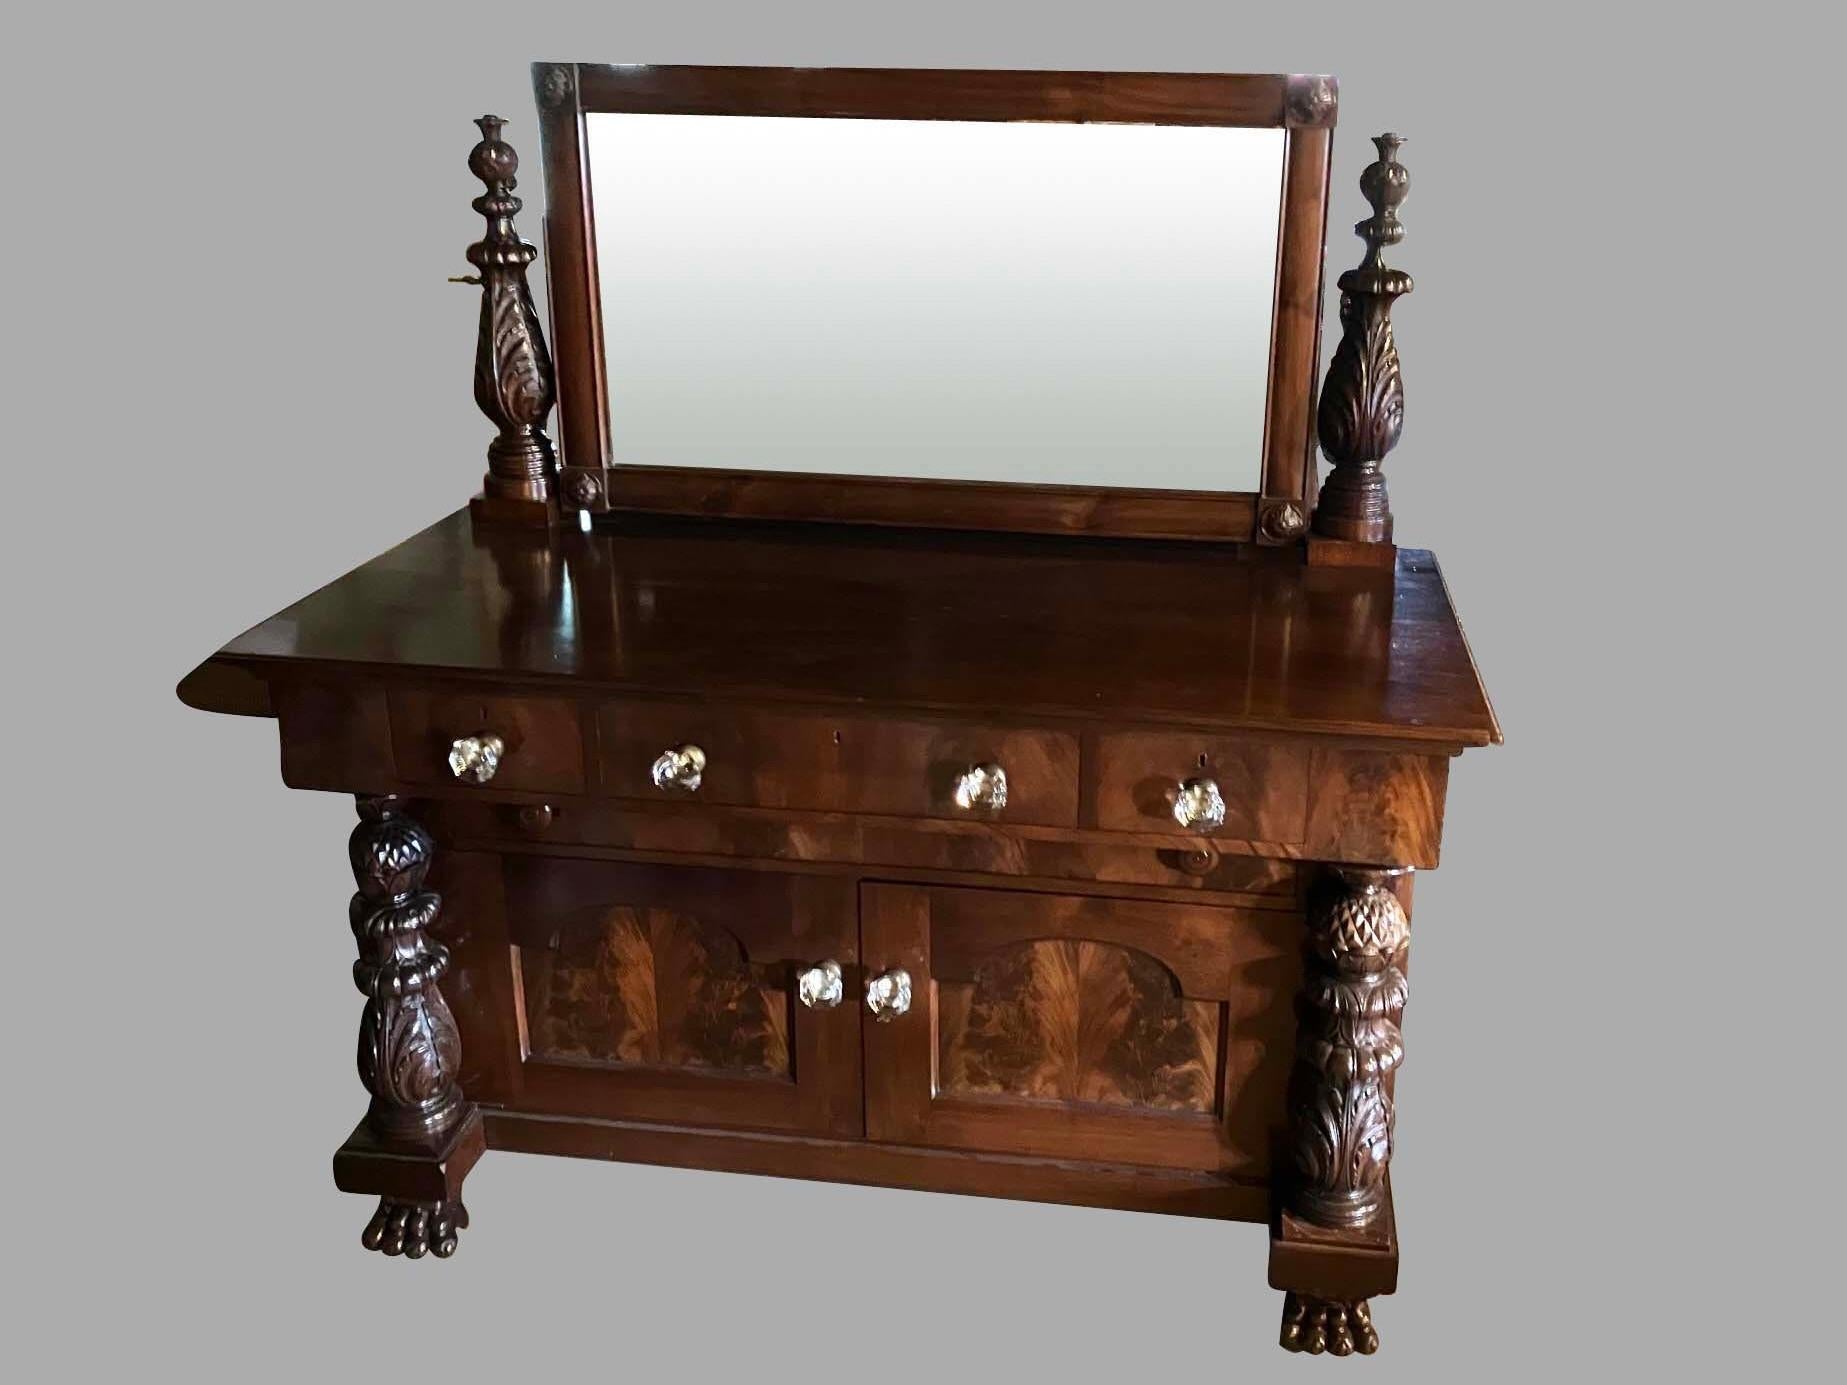 A substantial American Empire Revival period mahogany dressing chest the top with a molded edge and an attached adjustable mirror supported by well-carved standards. The lower case is fitted with 3 deep drawers retaining their original oversize